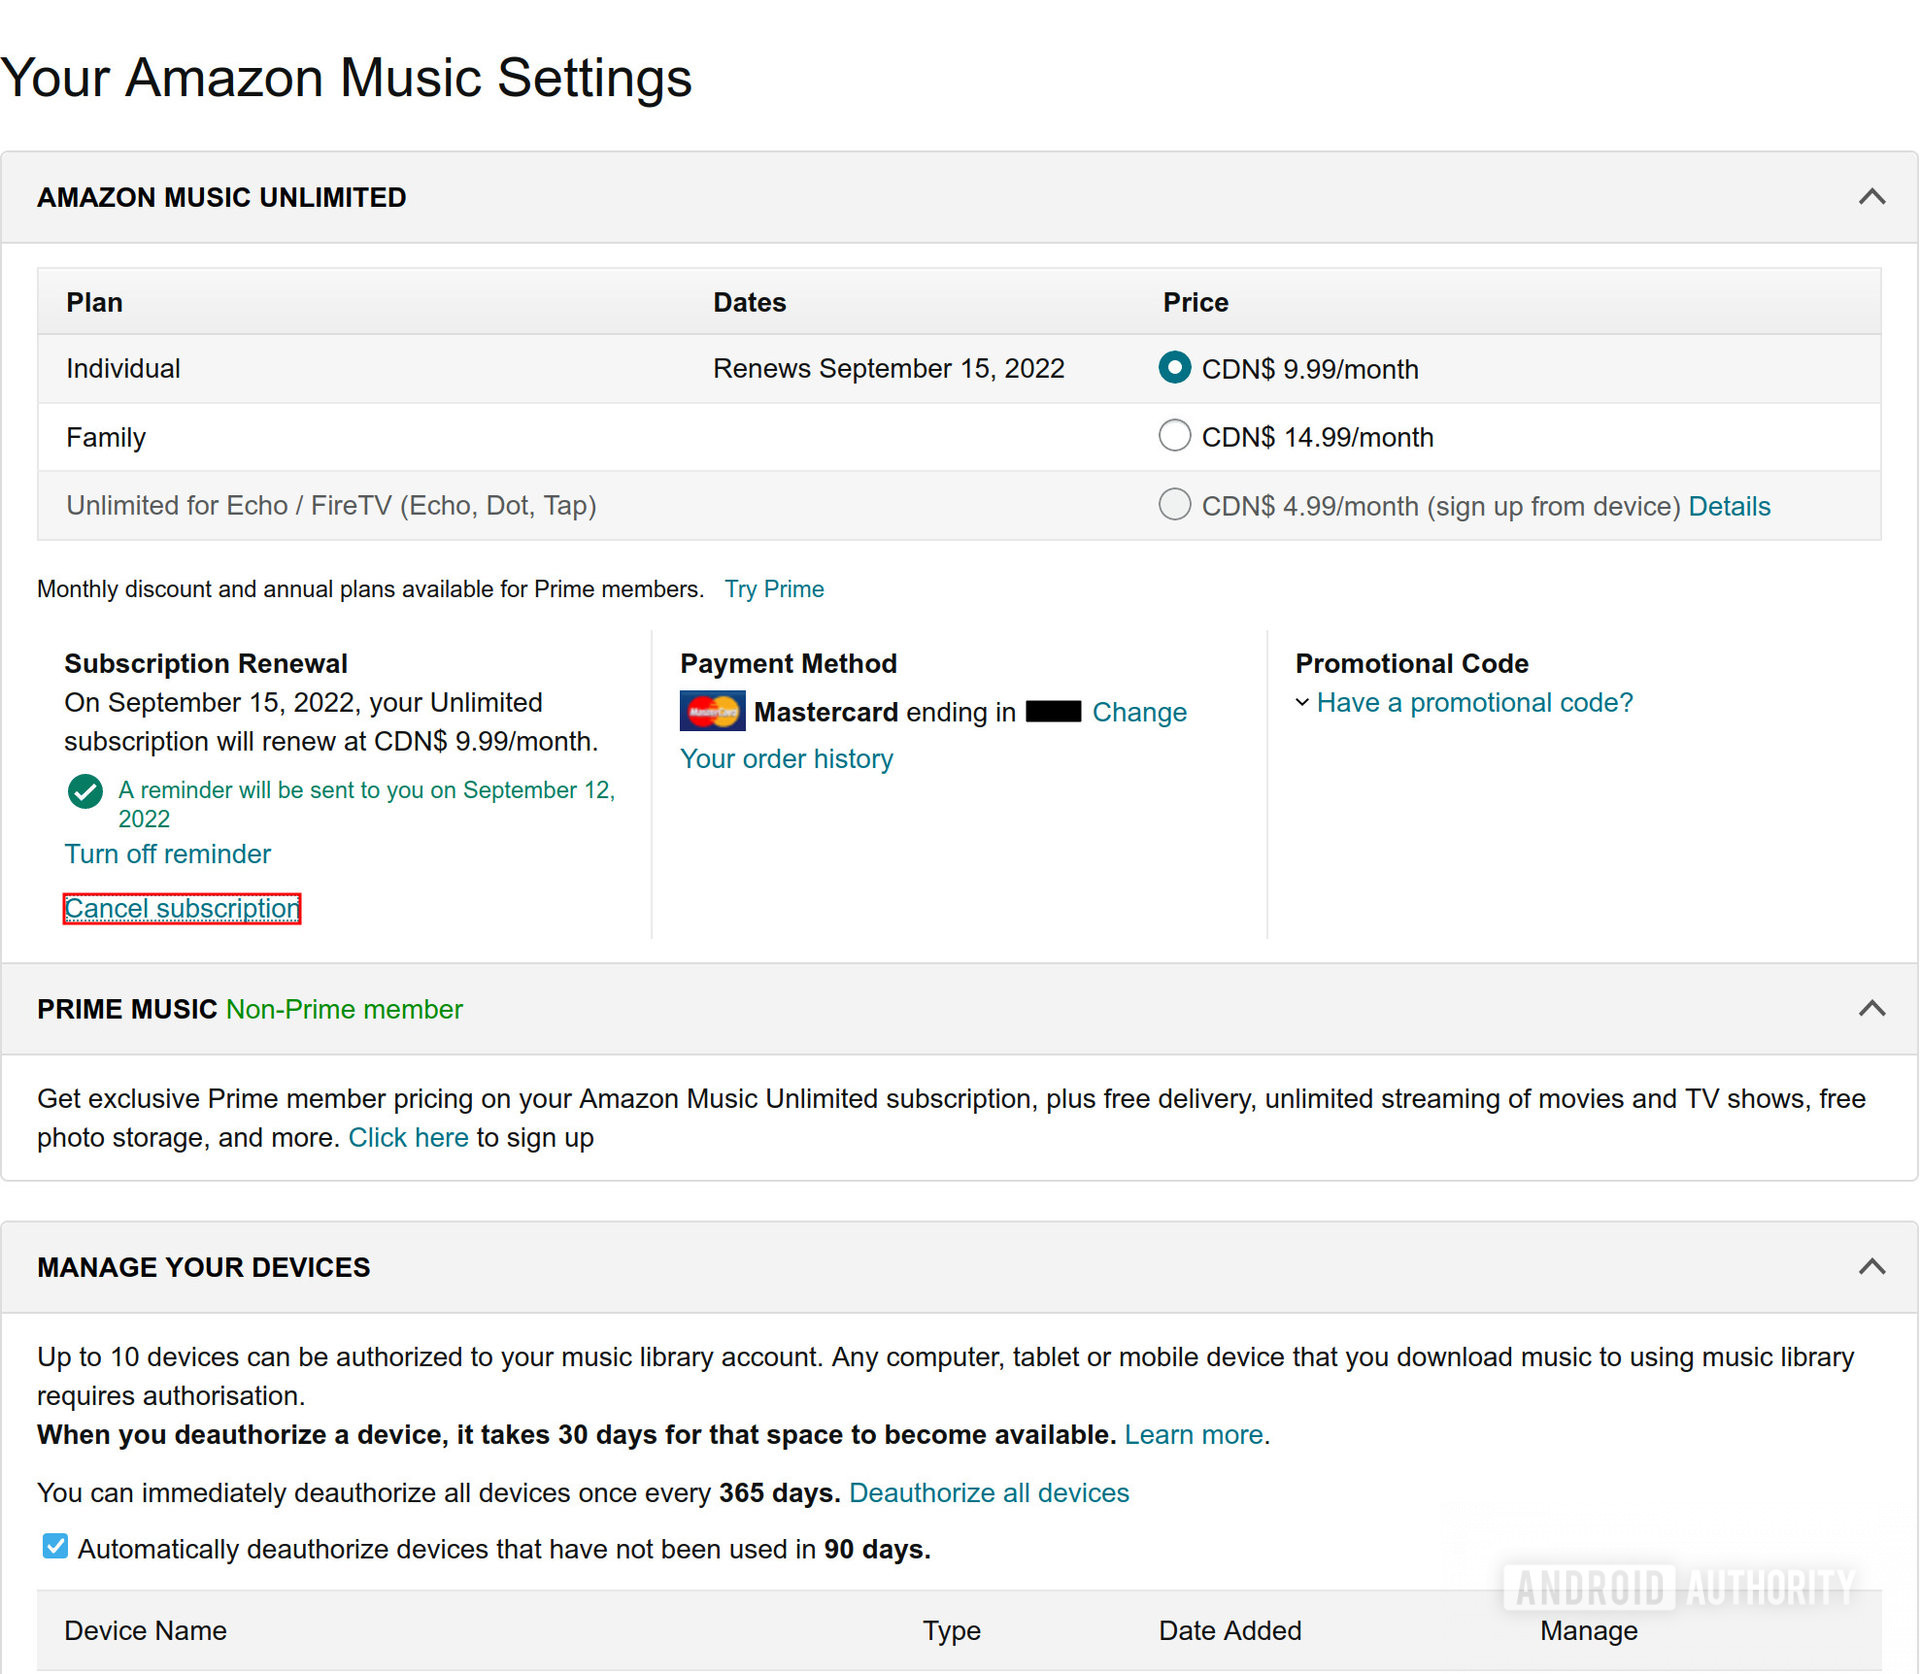 The Amazon Music settings webpage with 'Cancel subscription' highlighted with a red box around it.